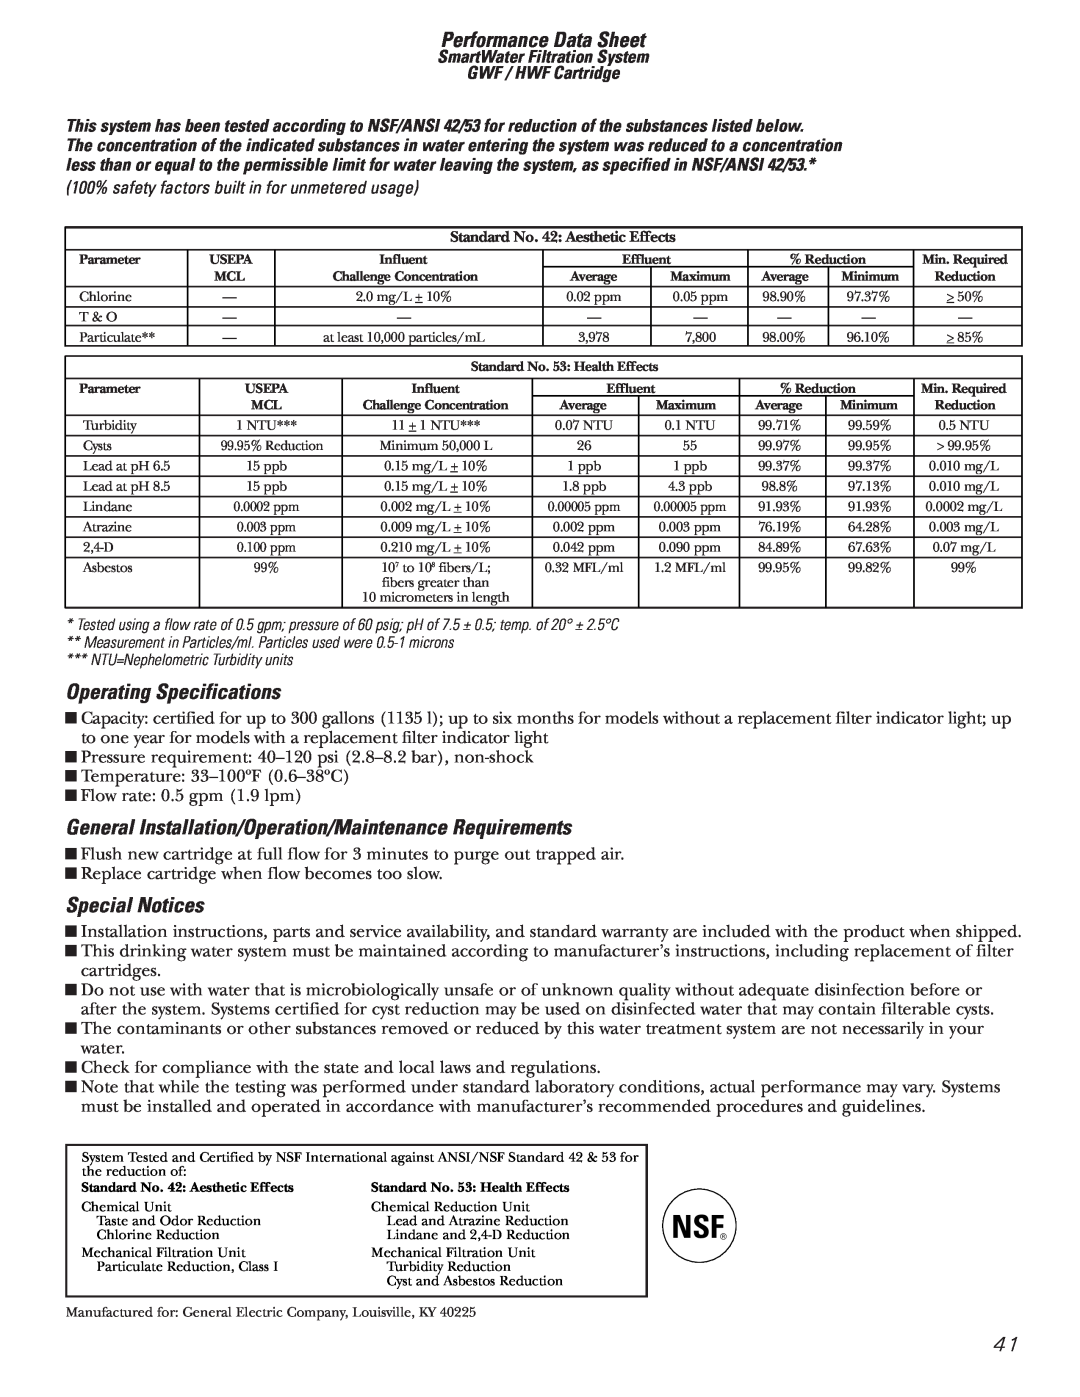 GE 200D8074P009 Performance Data Sheet, Operating Specifications, General Installation/Operation/Maintenance Requirements 